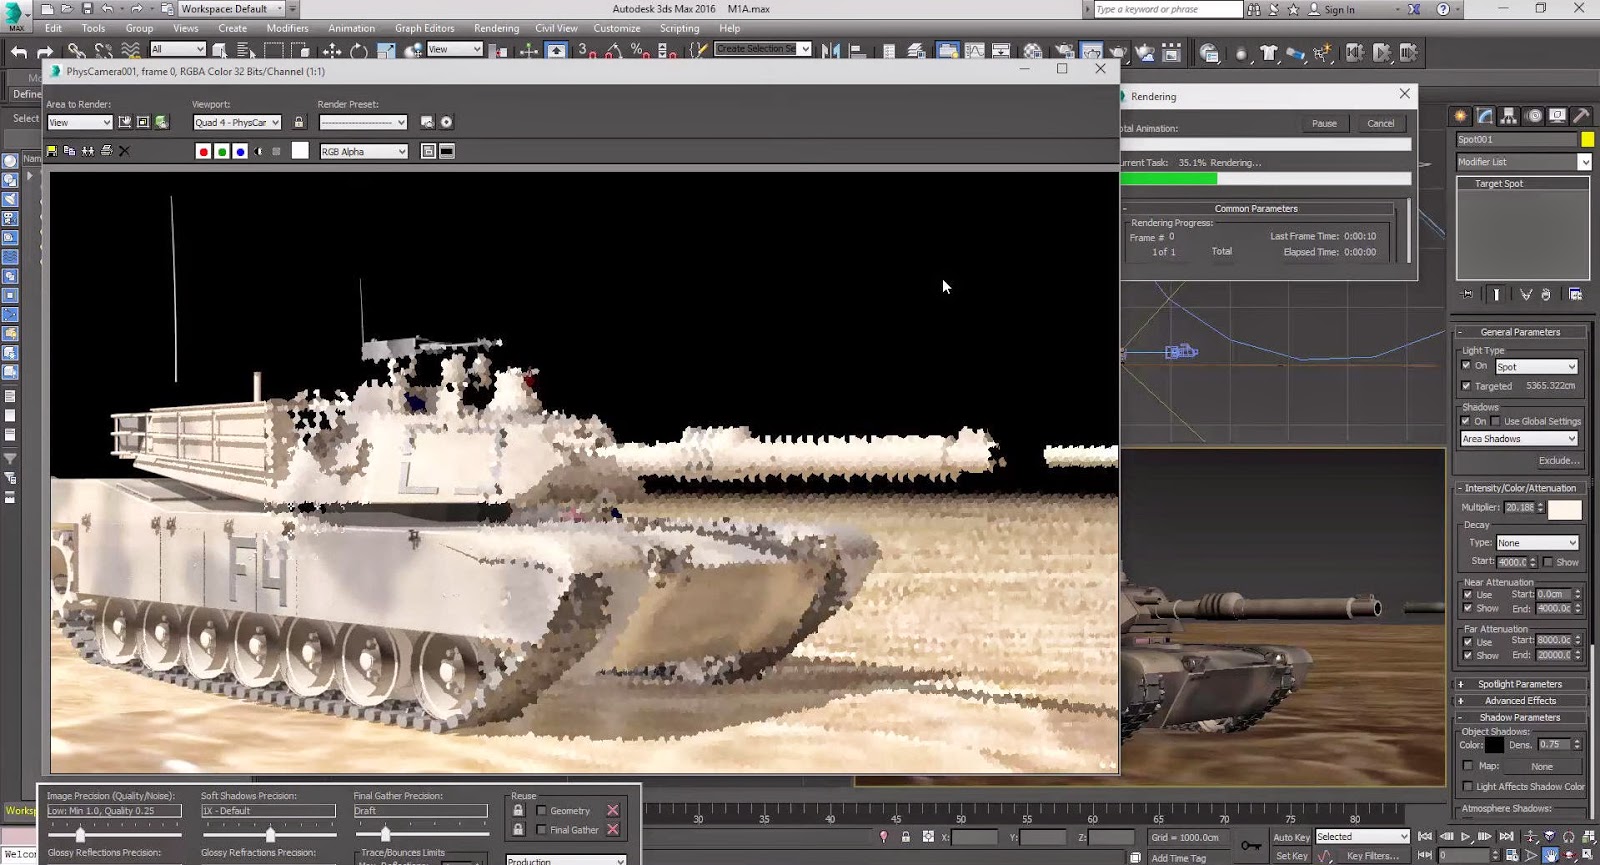 New physical camera in Autodesk 3ds Max 2016 | Computer Graphics Daily News